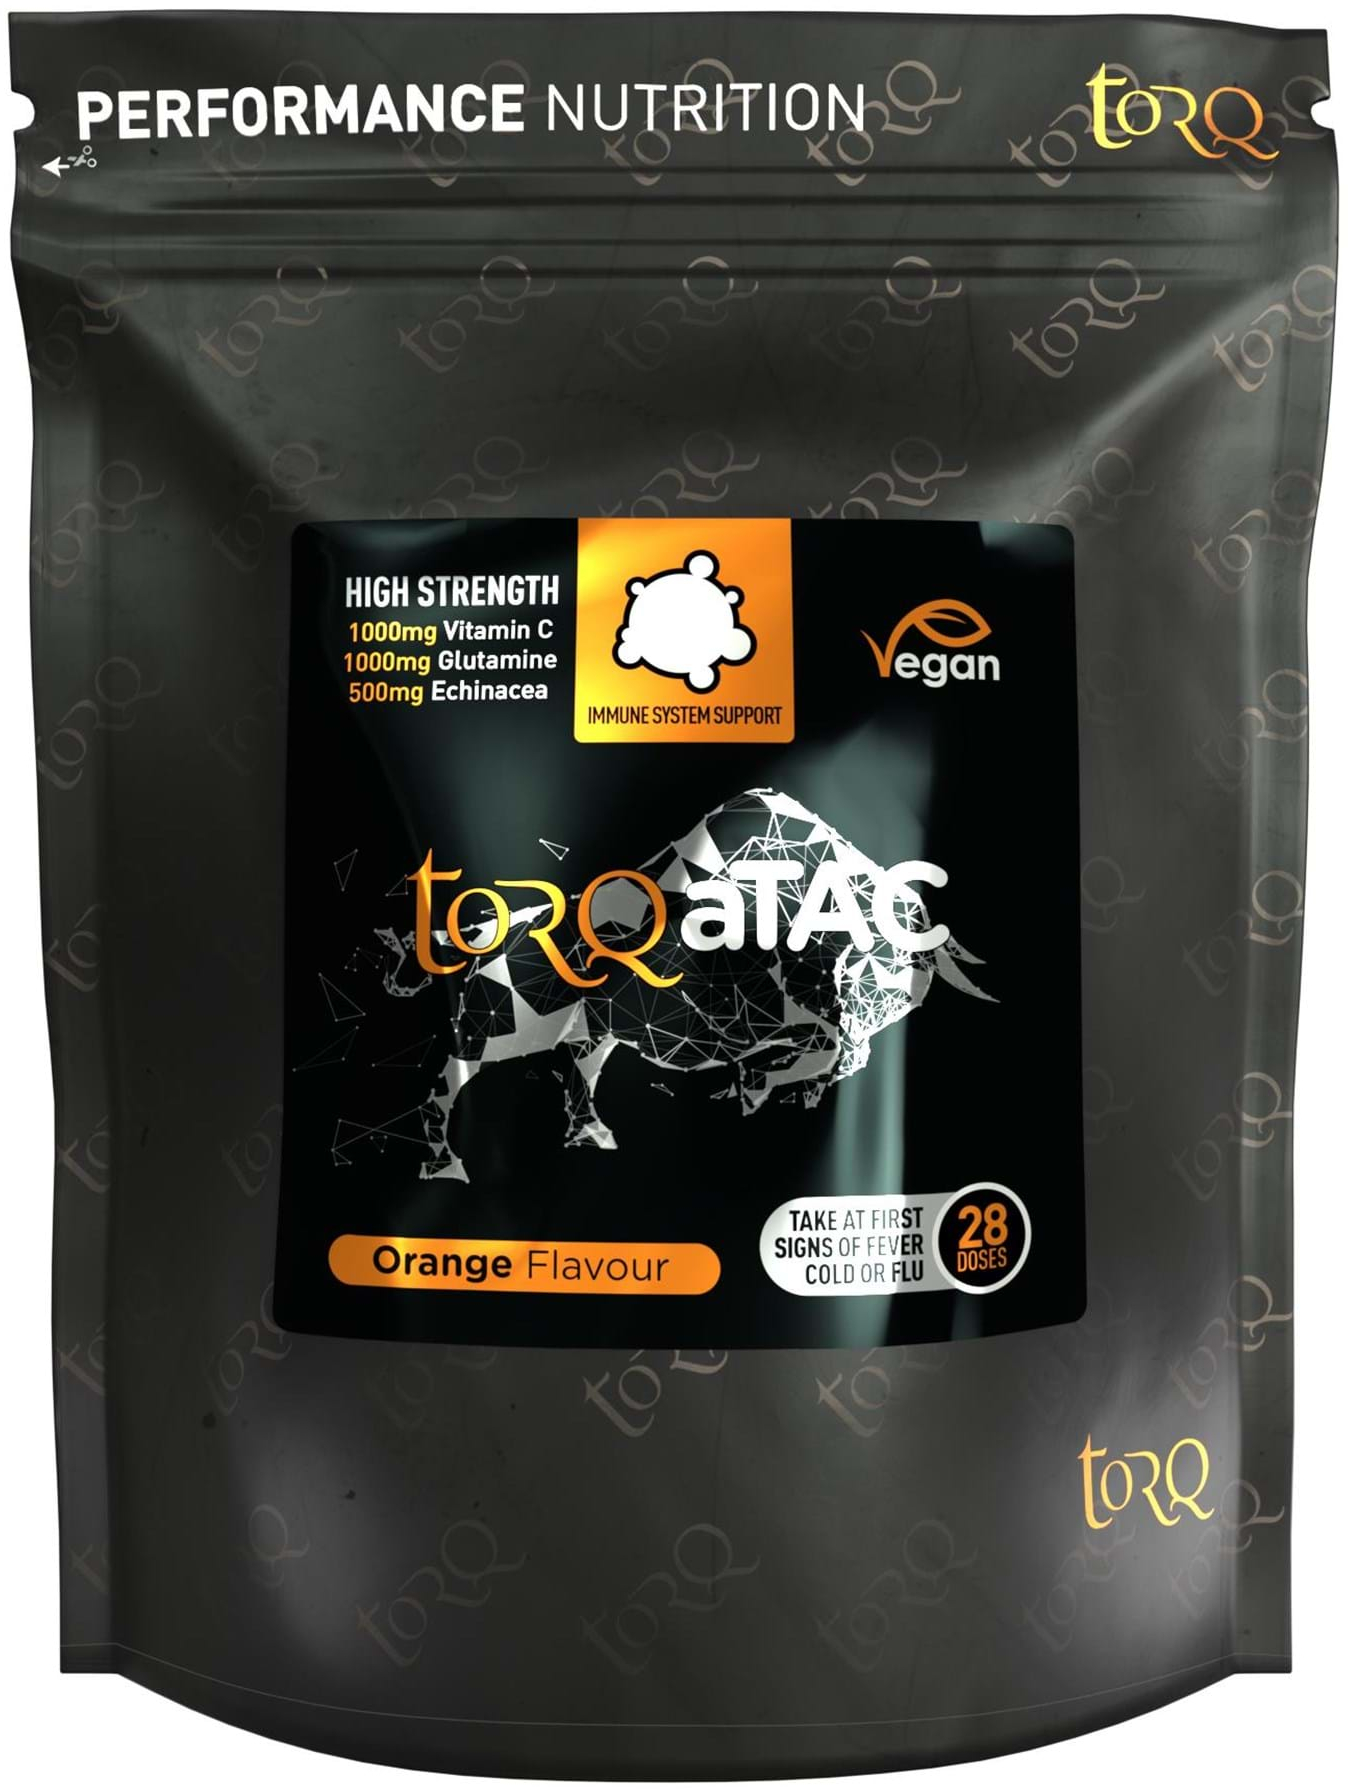 TORQ  aTAC Cold and Flu Relief 1 X 364G NO SIZE ORANGE